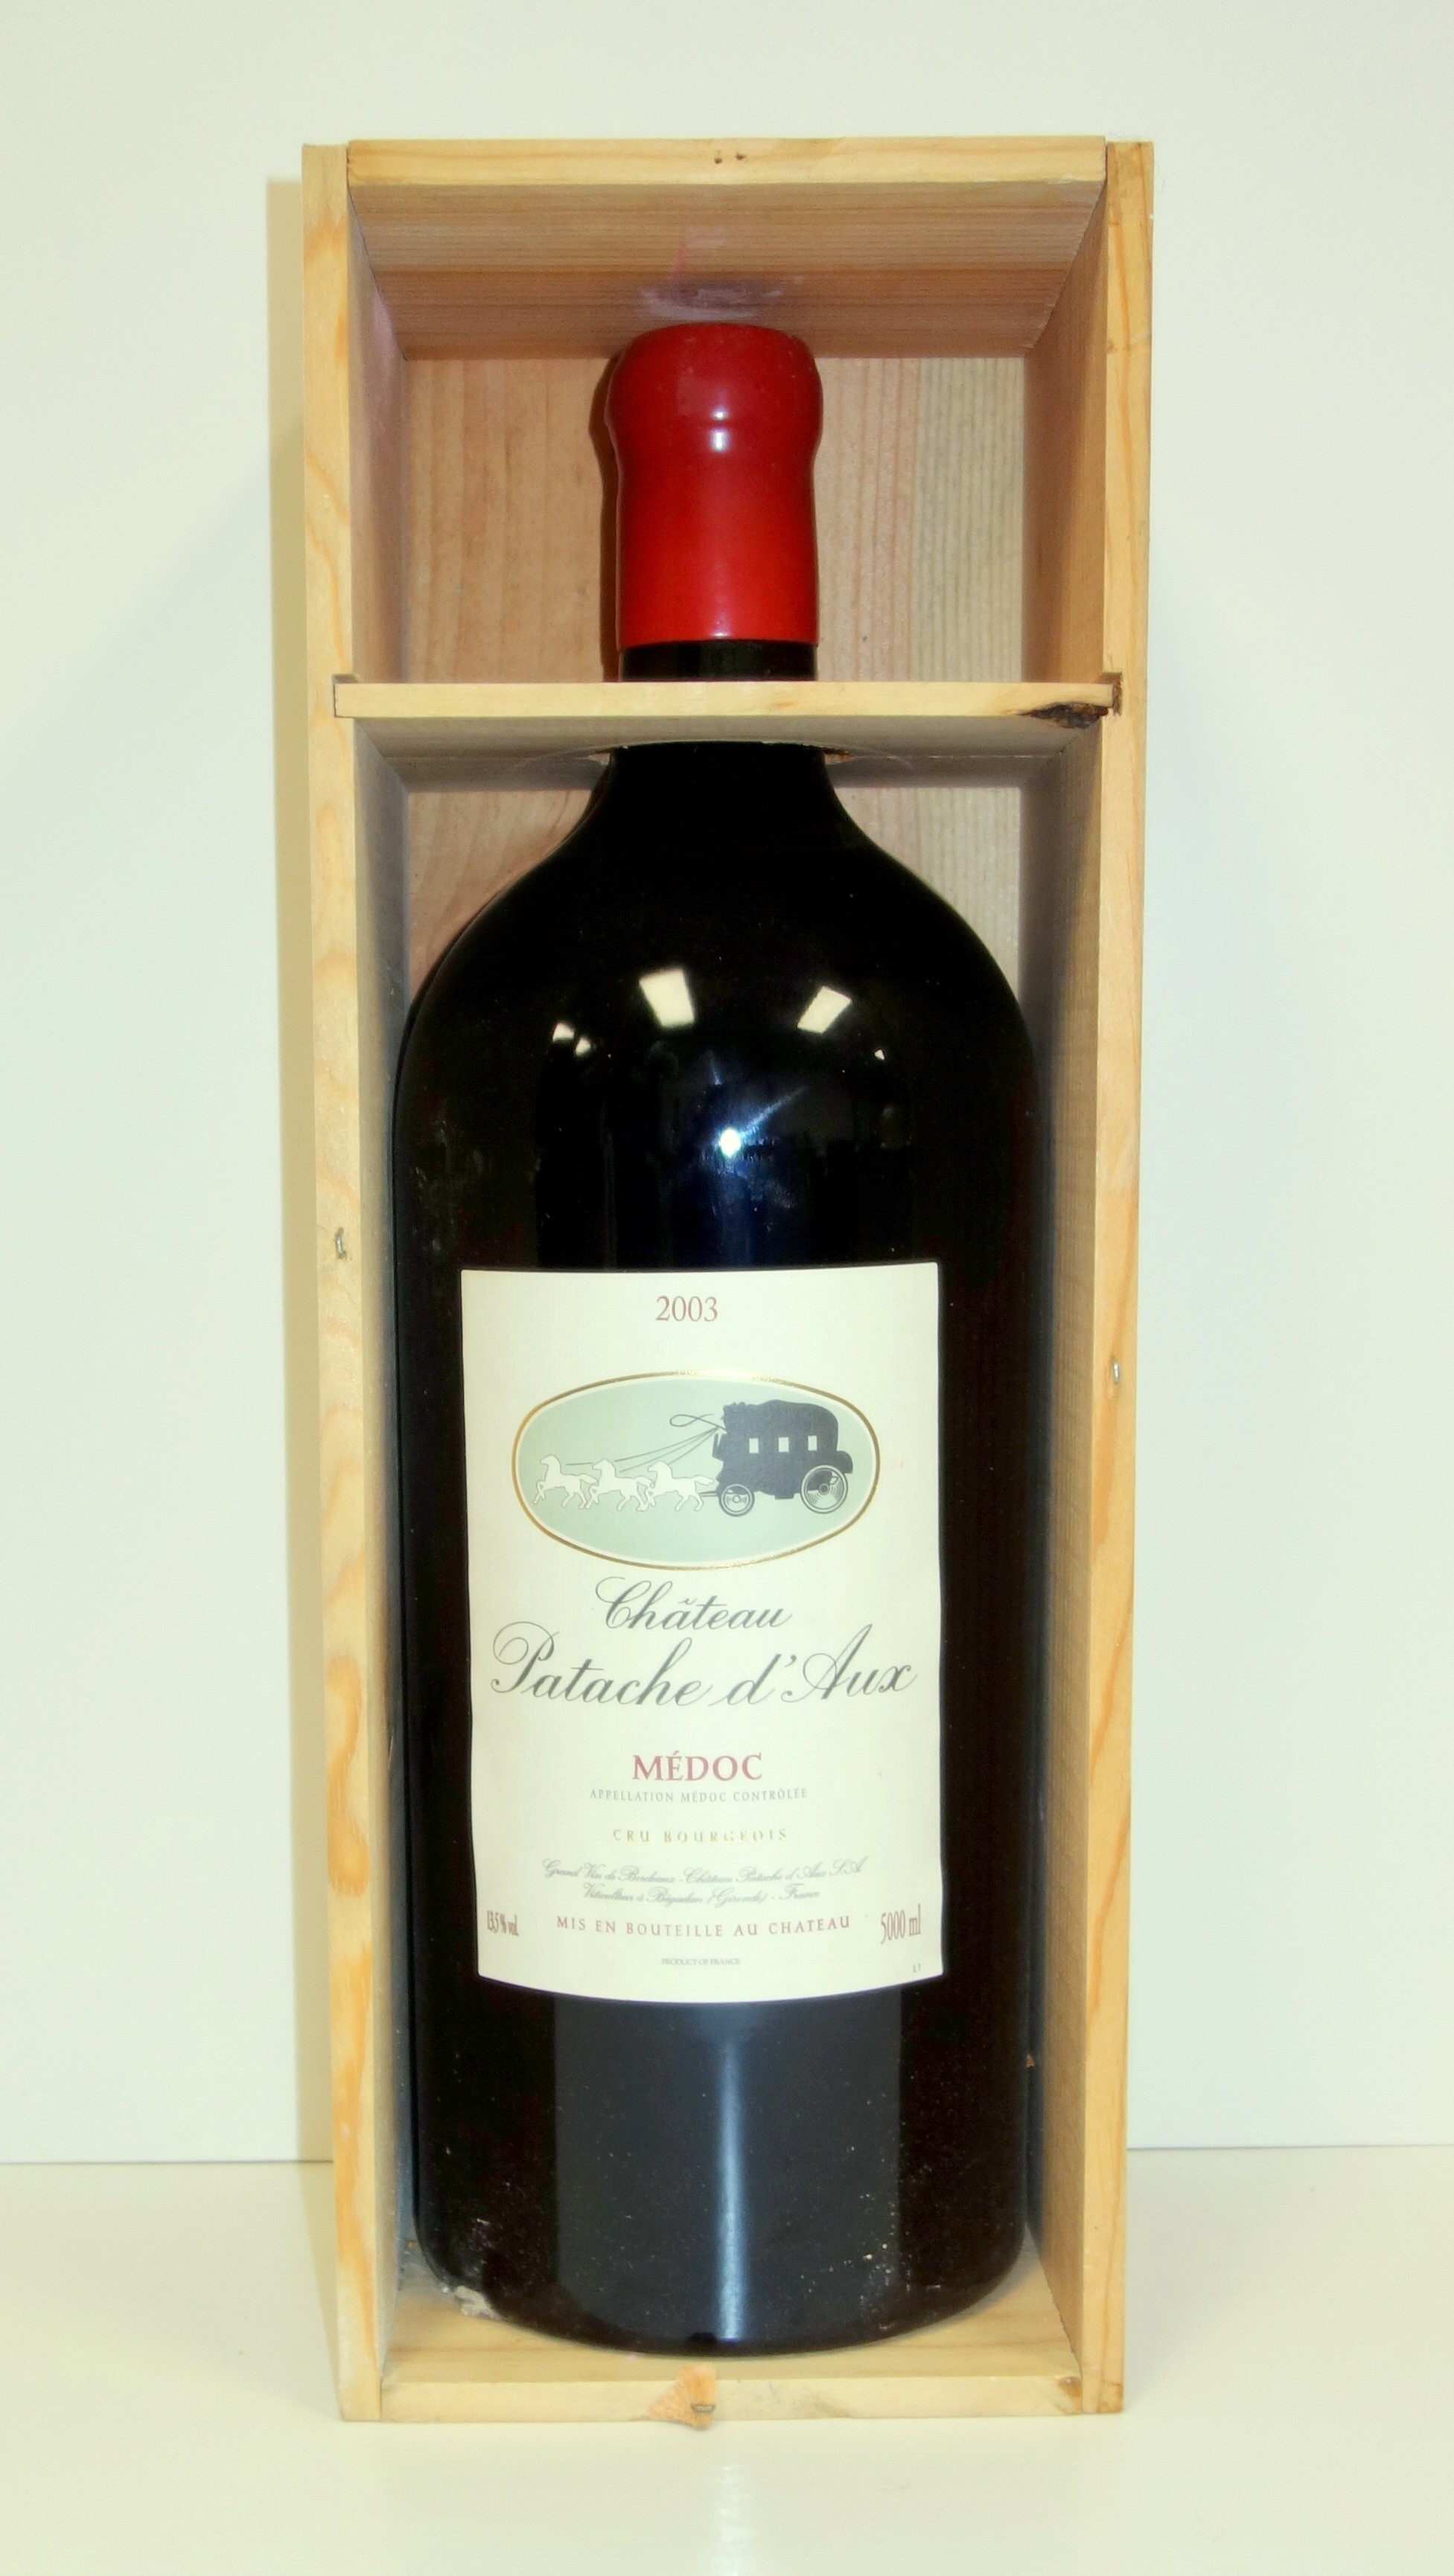 1 x 5 litre bottle Chateau Patache D'Aux, Cru Bourgeois, Medoc 2003, in OWC - Image 4 of 4